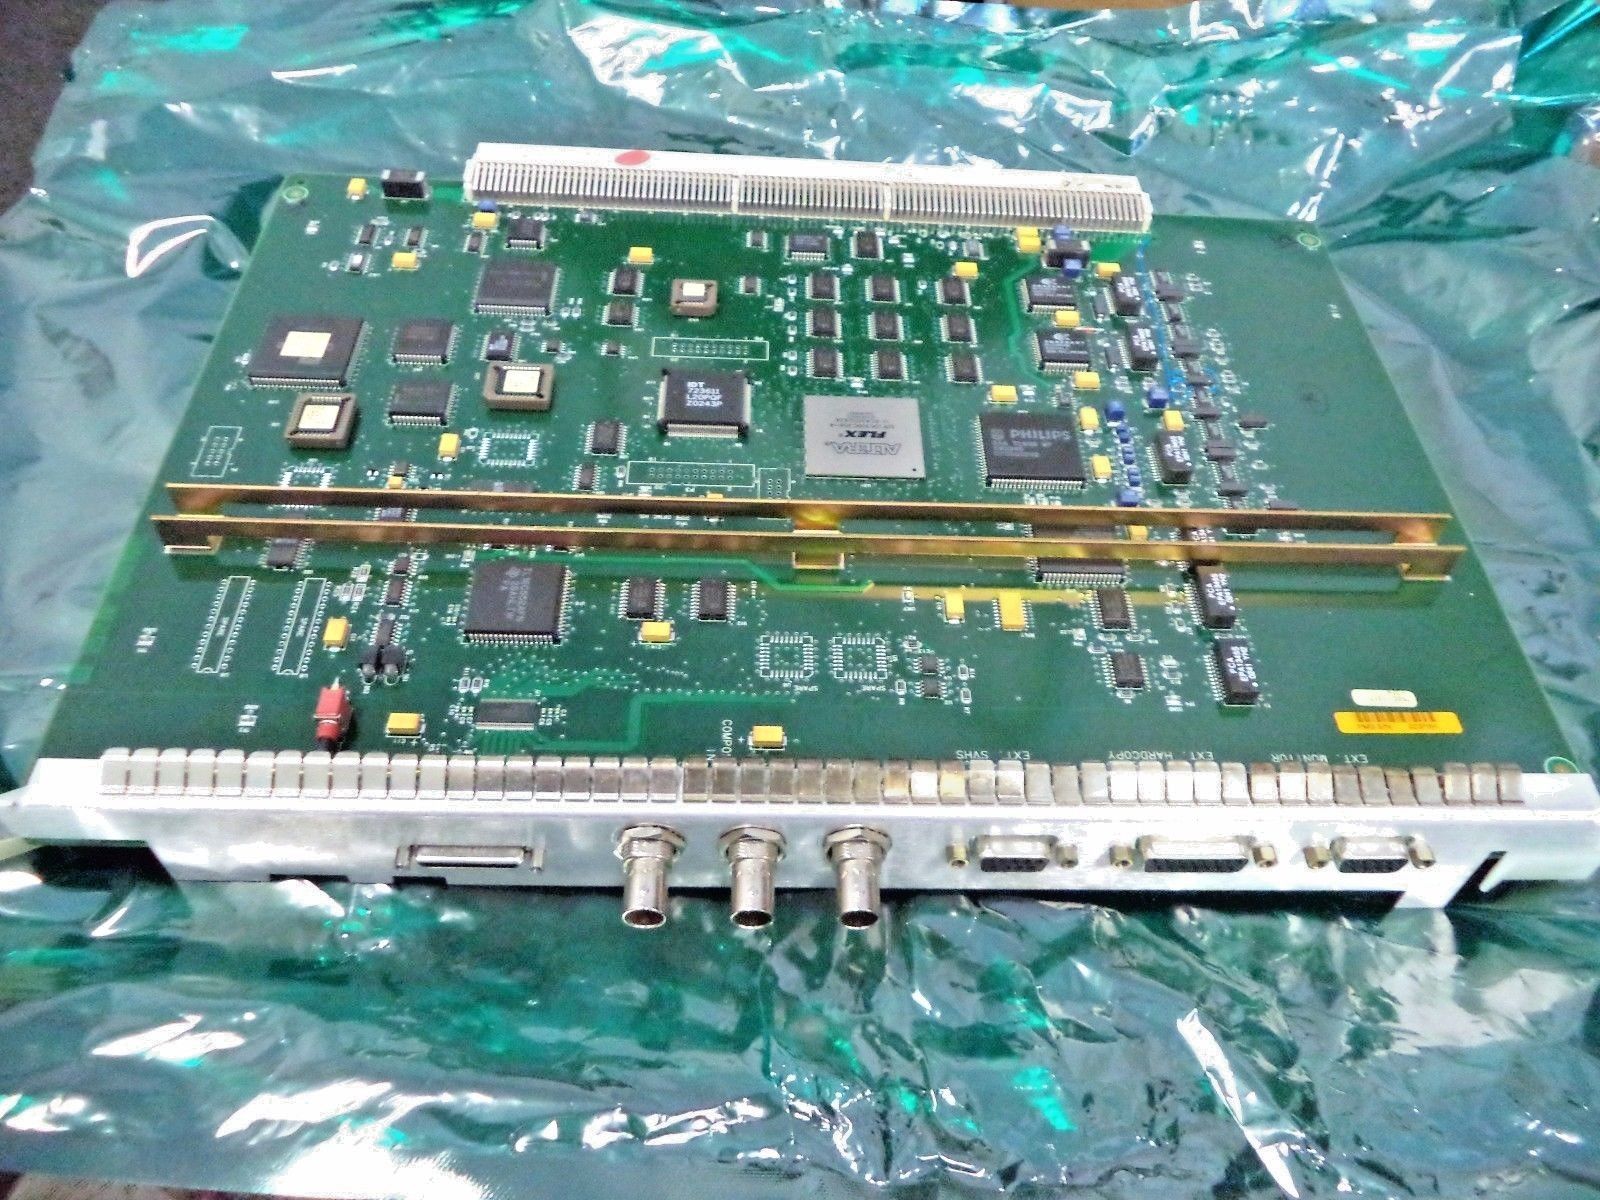 a close up of a computer board on a plastic bag